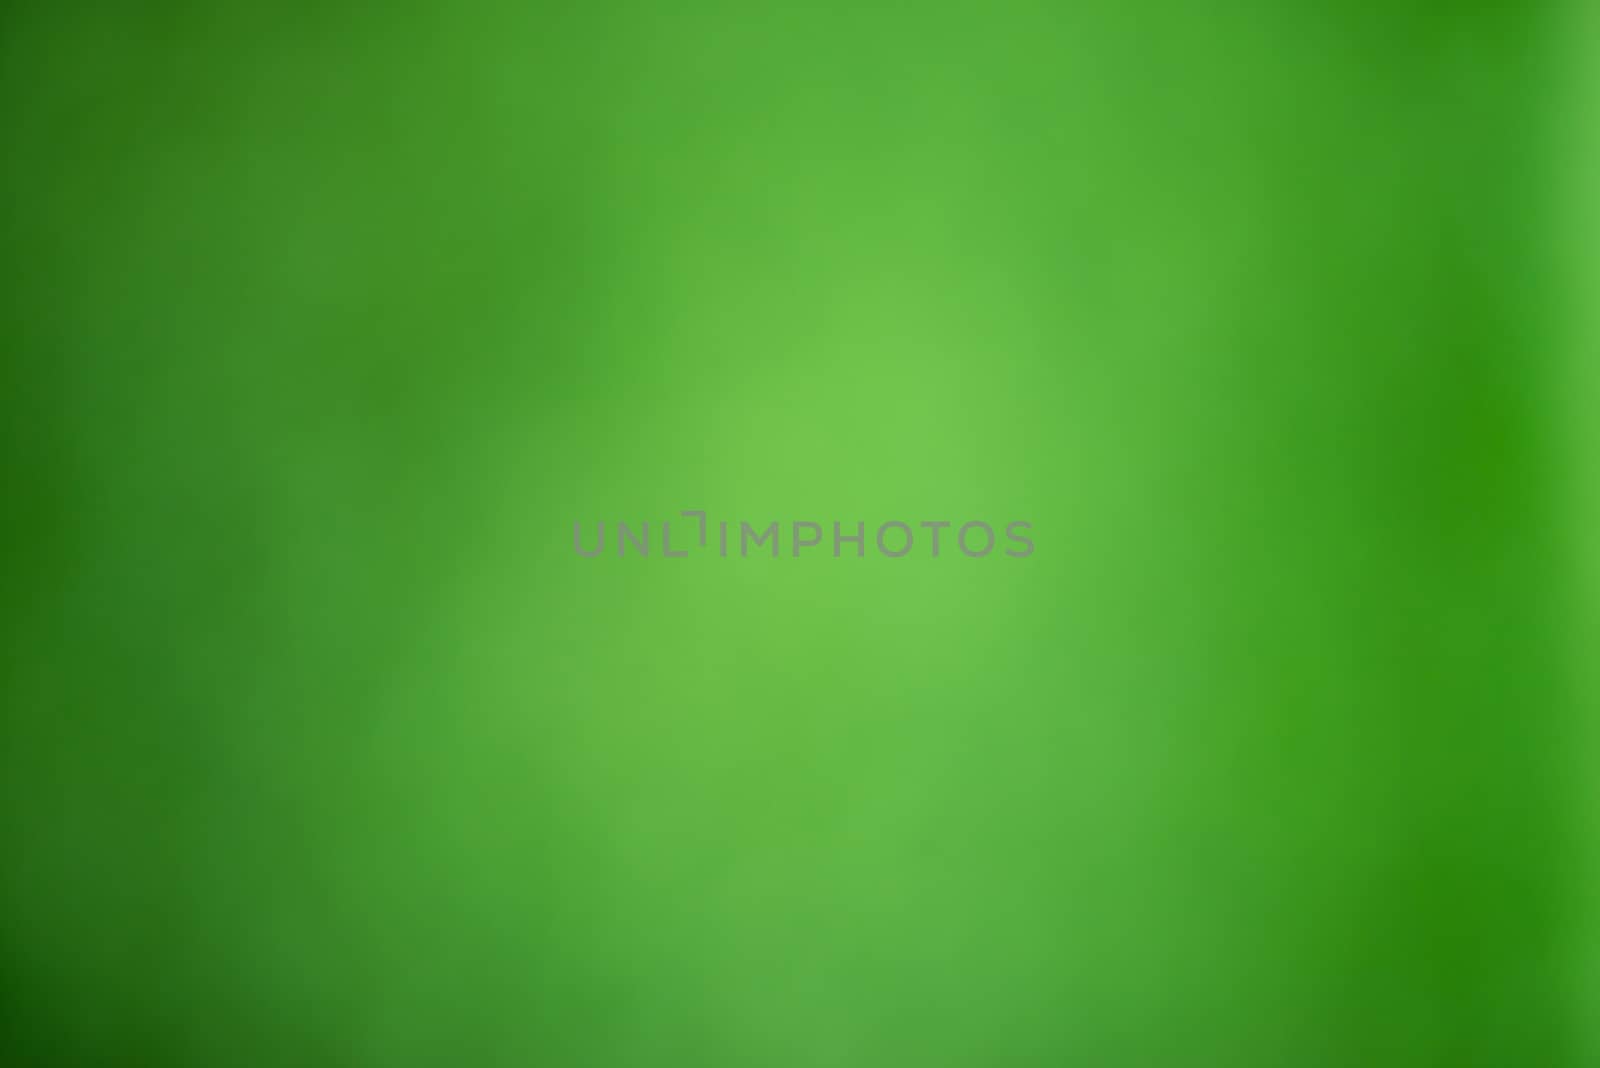 Abstract gradient green blurred background by Suwanmanee